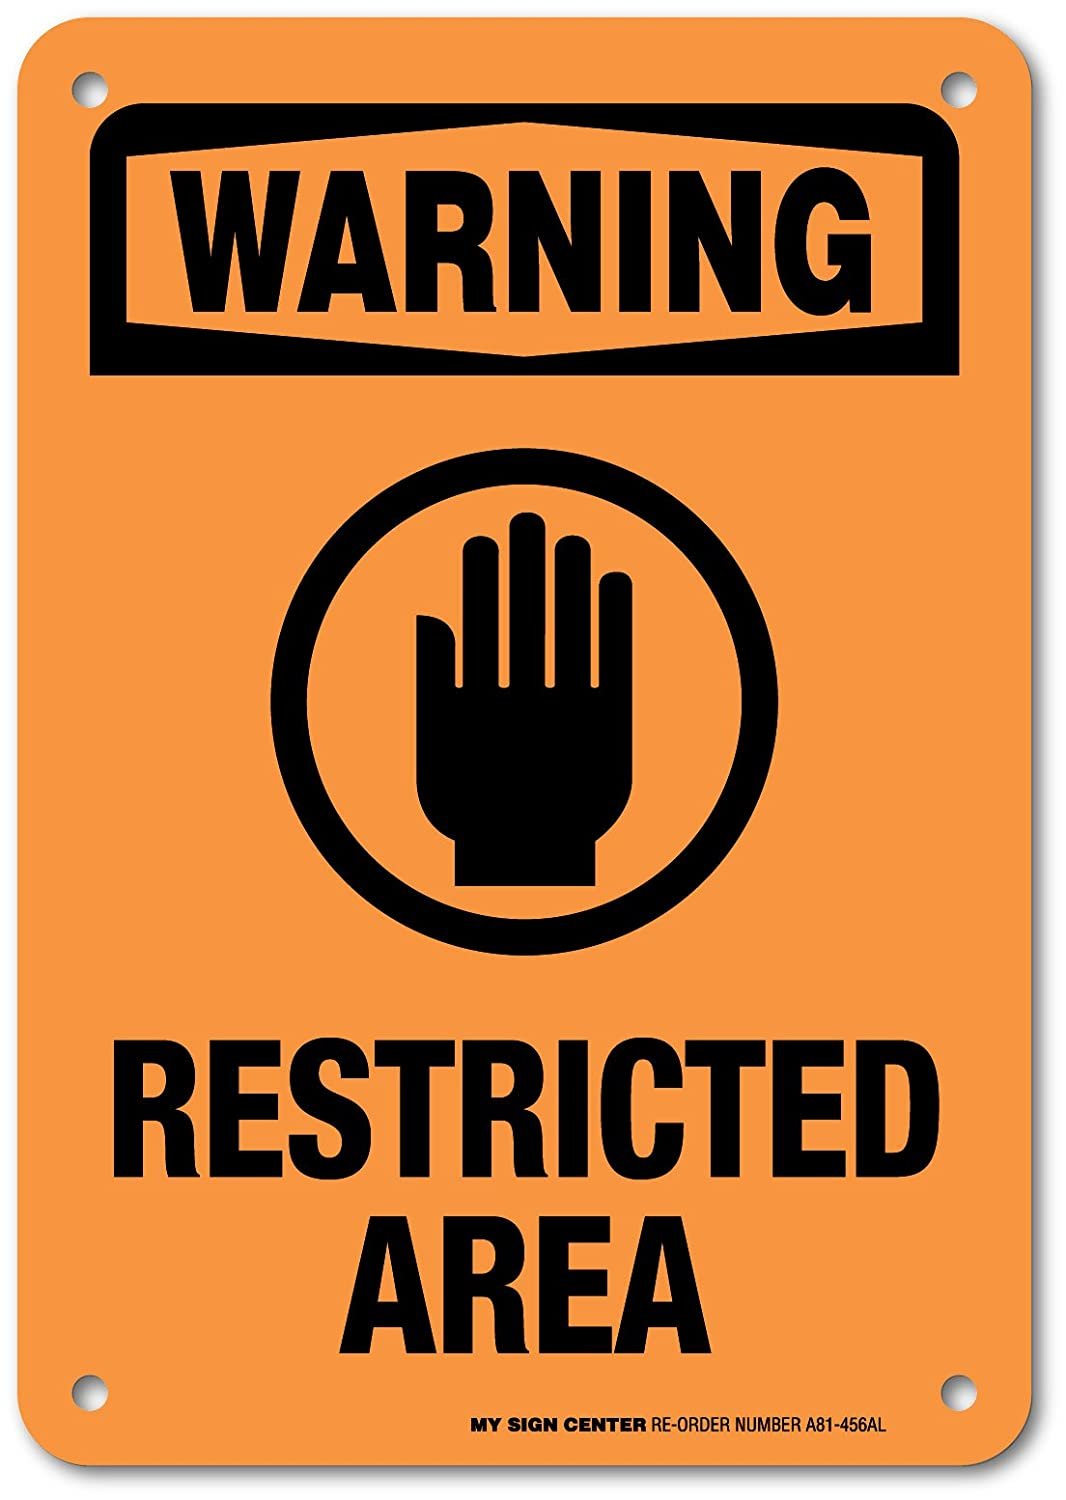 Restricted Area Warning Sign